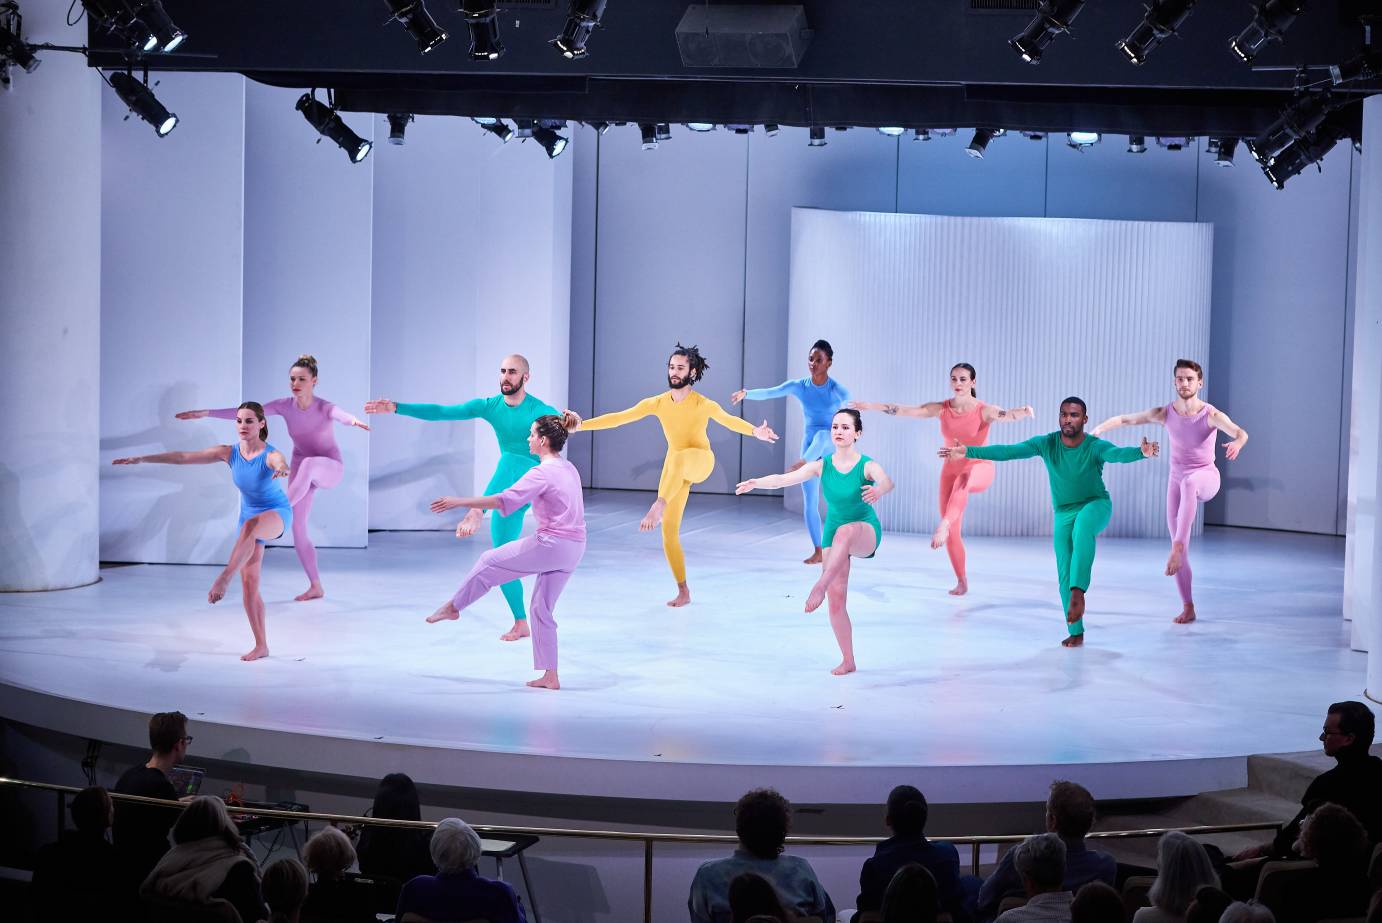 Dancers in bright unitards lift their leg forward in attitude as they contract